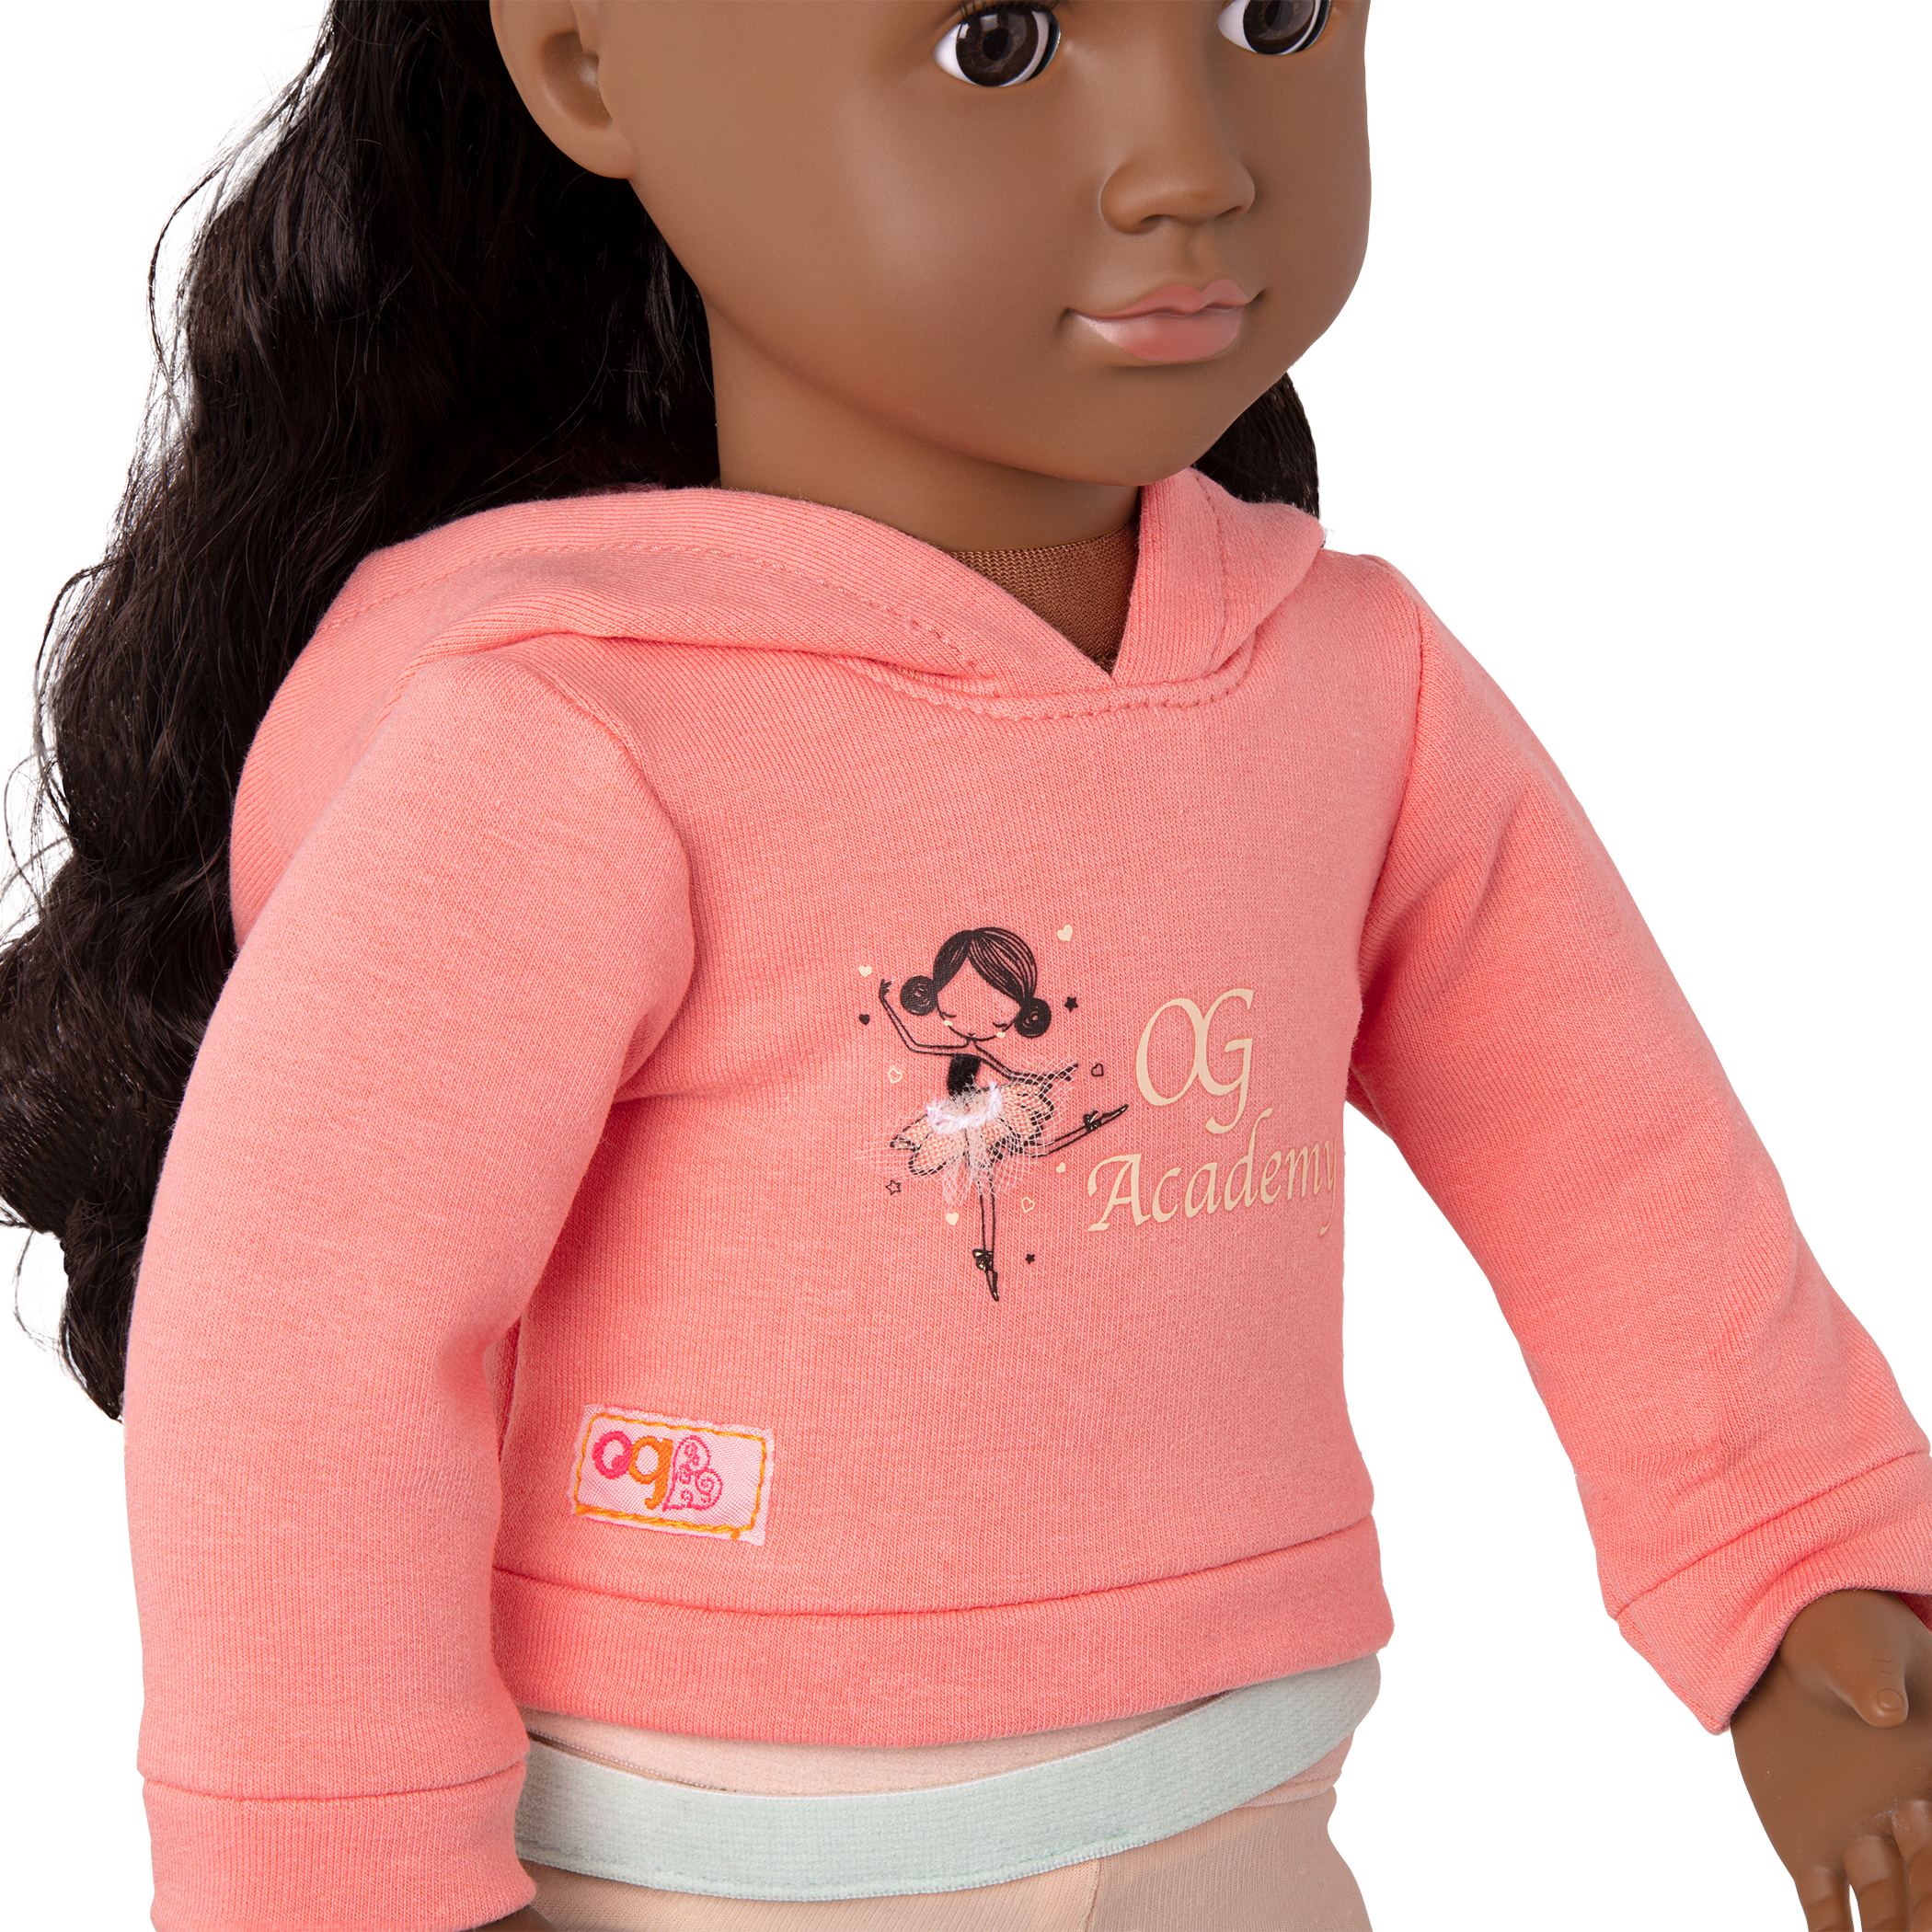 Studio Style Ballet Practice Hooded Sweater Outfit for 18-inch Dolls